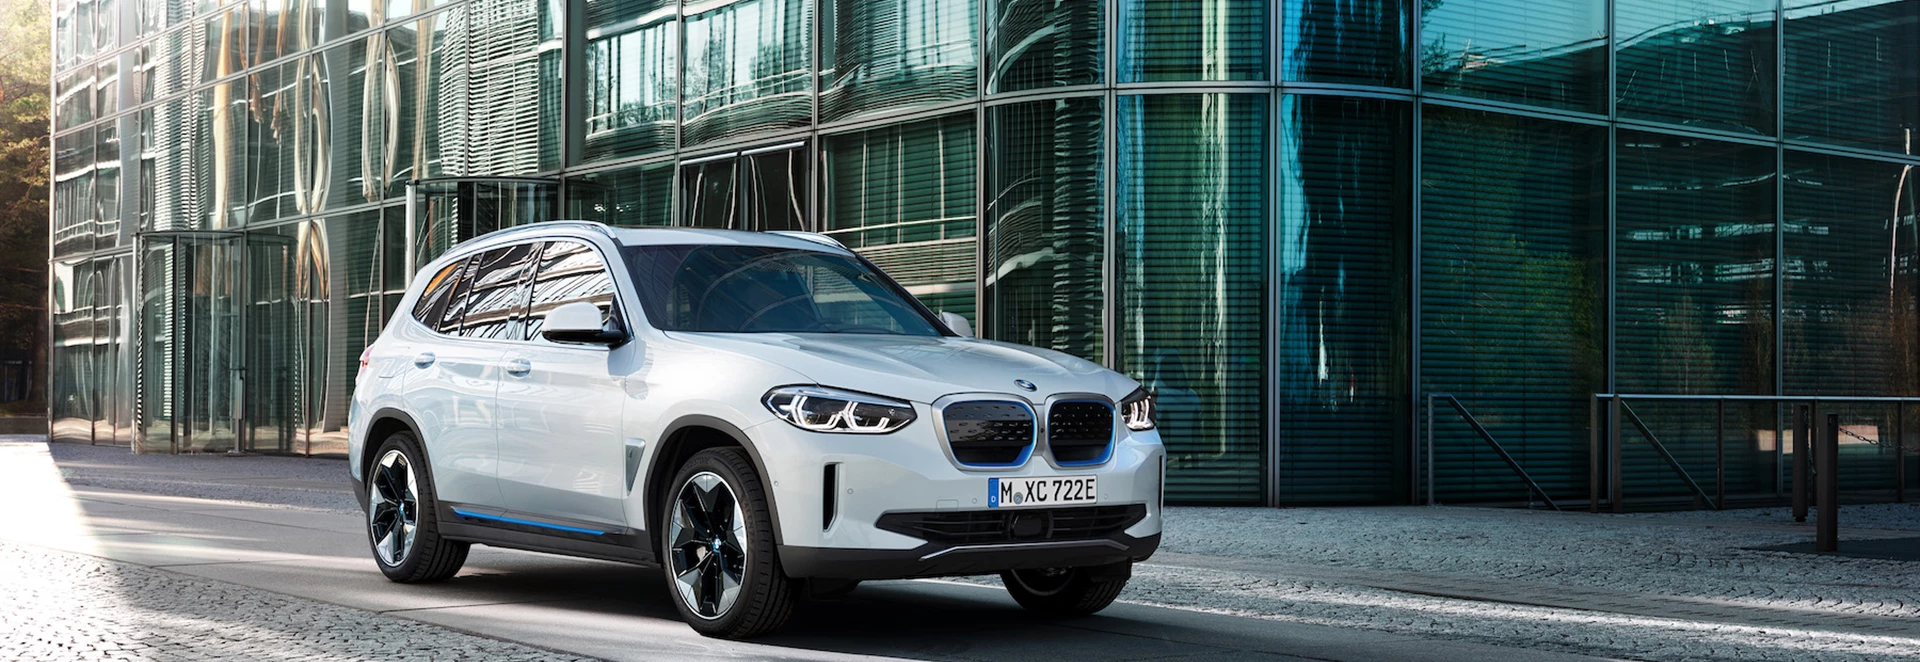 BMW unveils first electric SUV with new iX3 